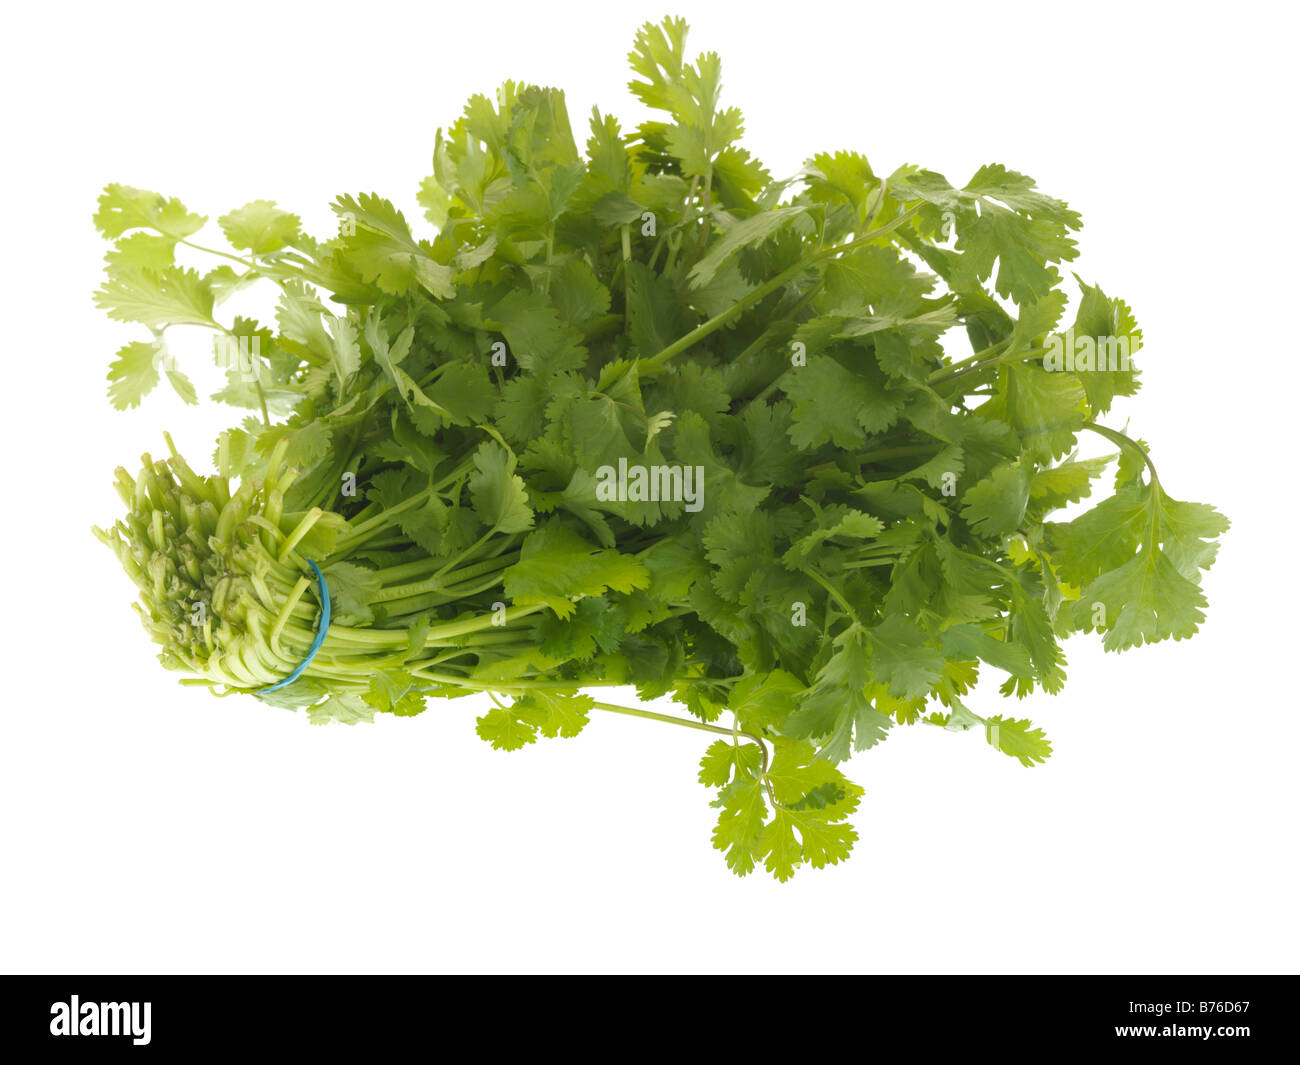 Fresh Healthy Bunch Of Ripe Aromatic Flat Leaf Parsley Cooking Ingredient Isolated Against A White Background With No People And A Clipping Path Stock Photo